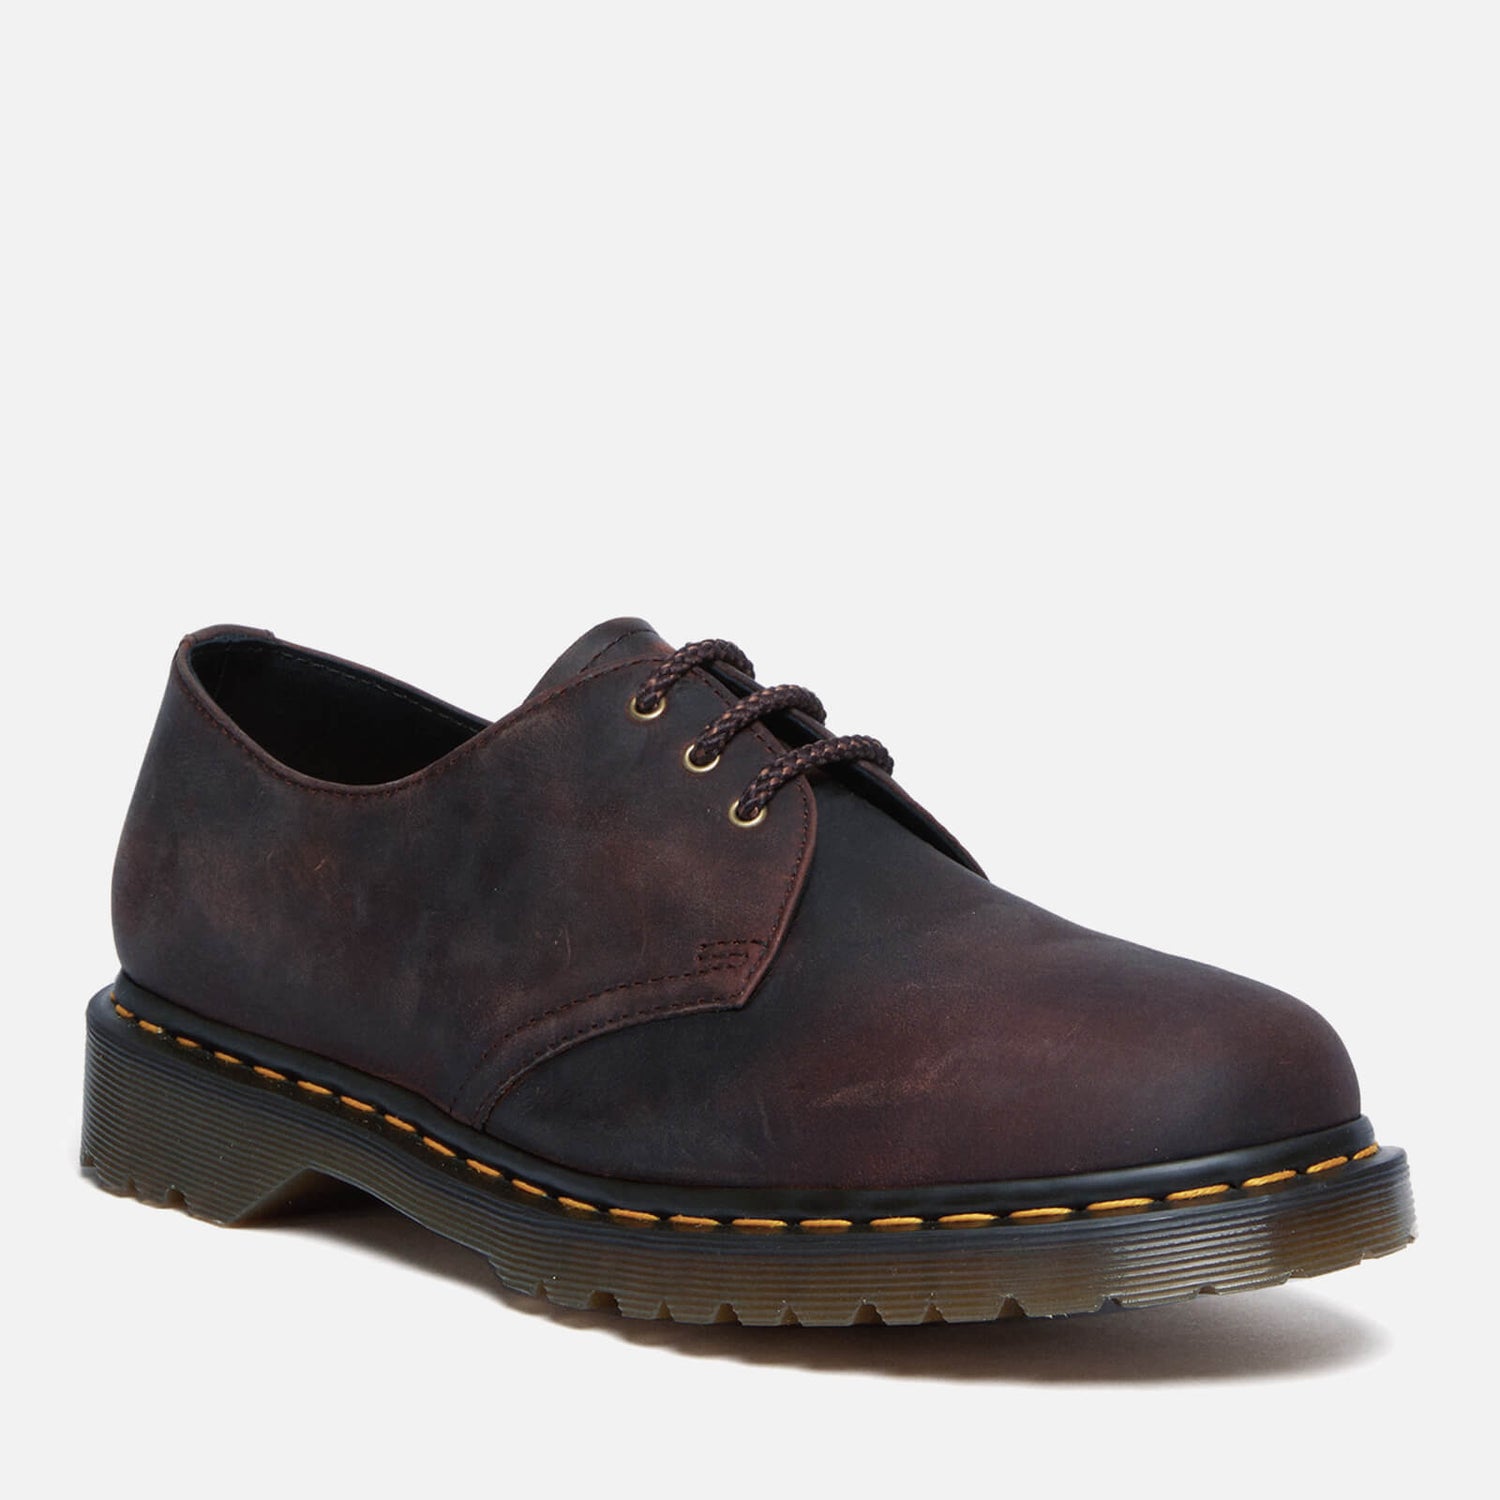 Dr. Martens 1461 Waxed Leather Shoes - UK 7